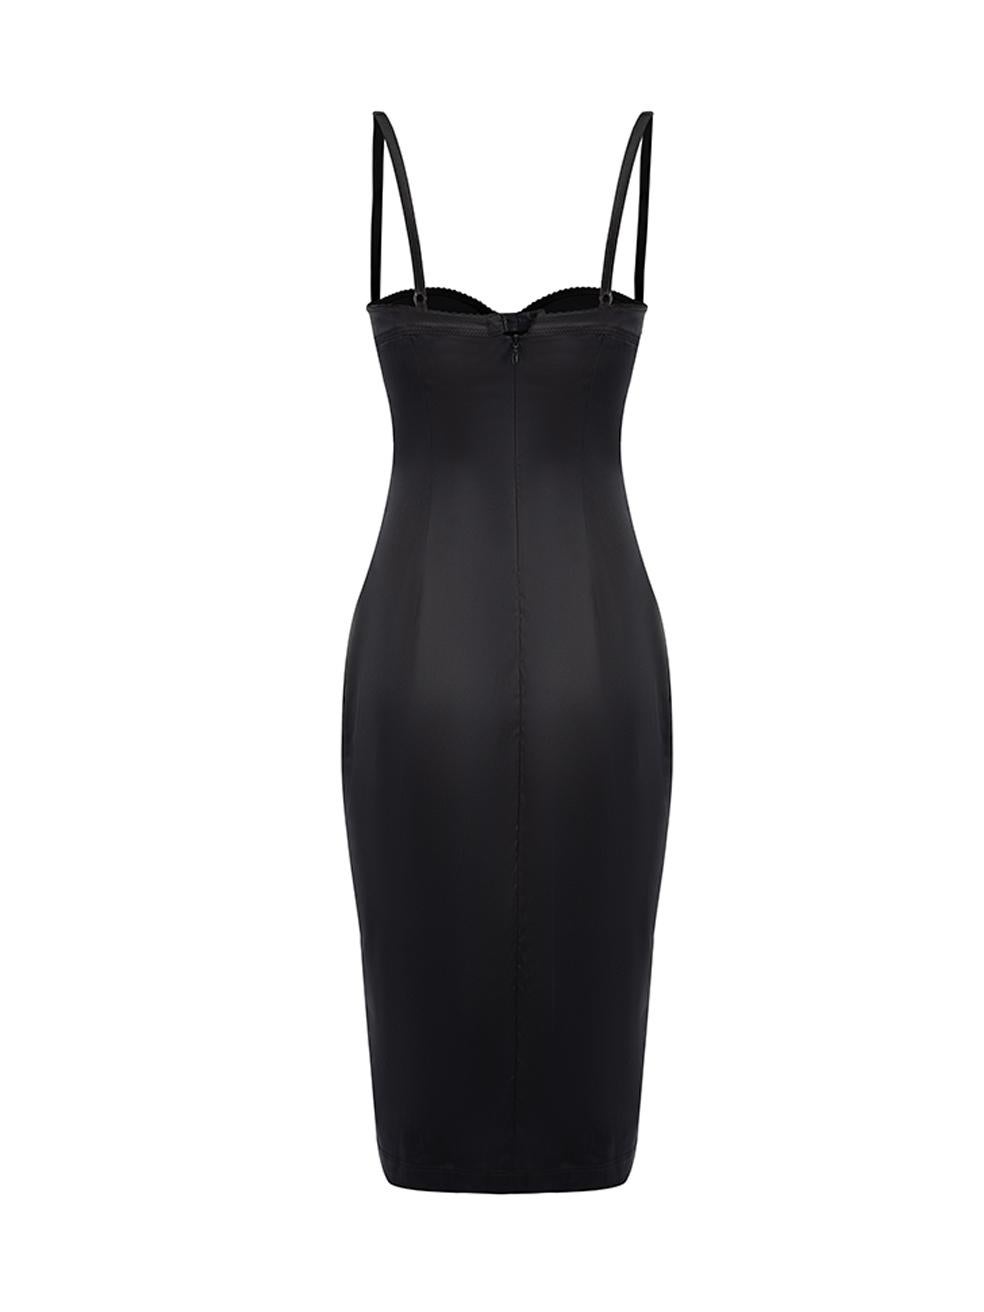 Pre-Loved Dolce & Gabbana Women's Black Wired Slip Dress In Excellent Condition In London, GB